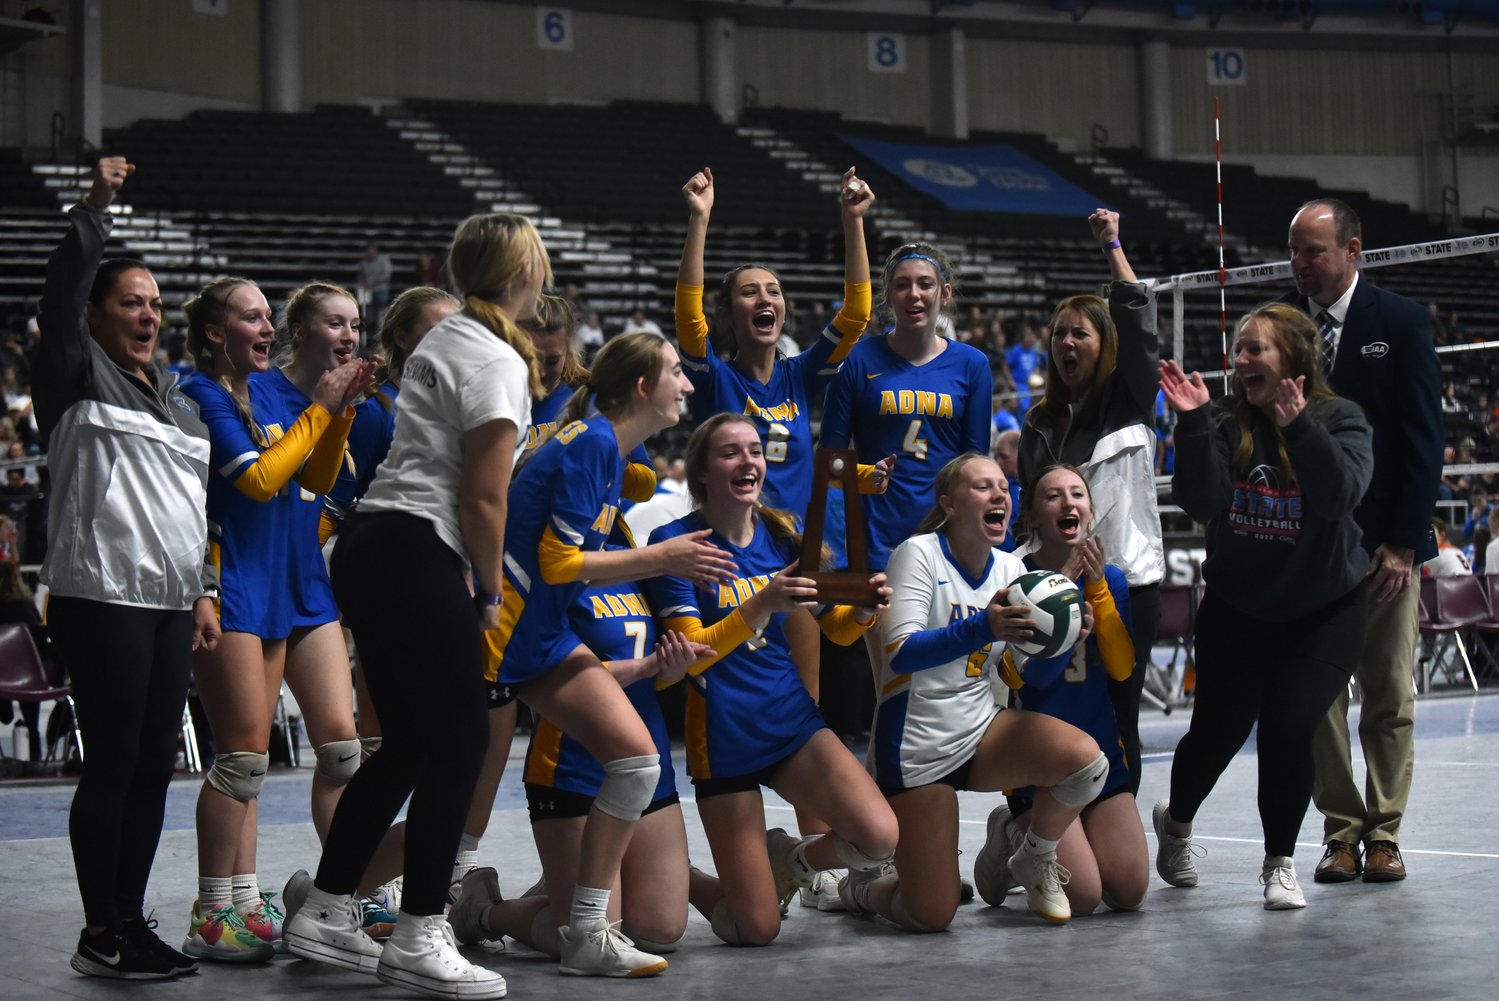 The Adna volleyball team celebrates after its five-set win in the fifth-place game at the 2B state volleyball tournament in Yakima on Nov. 11.